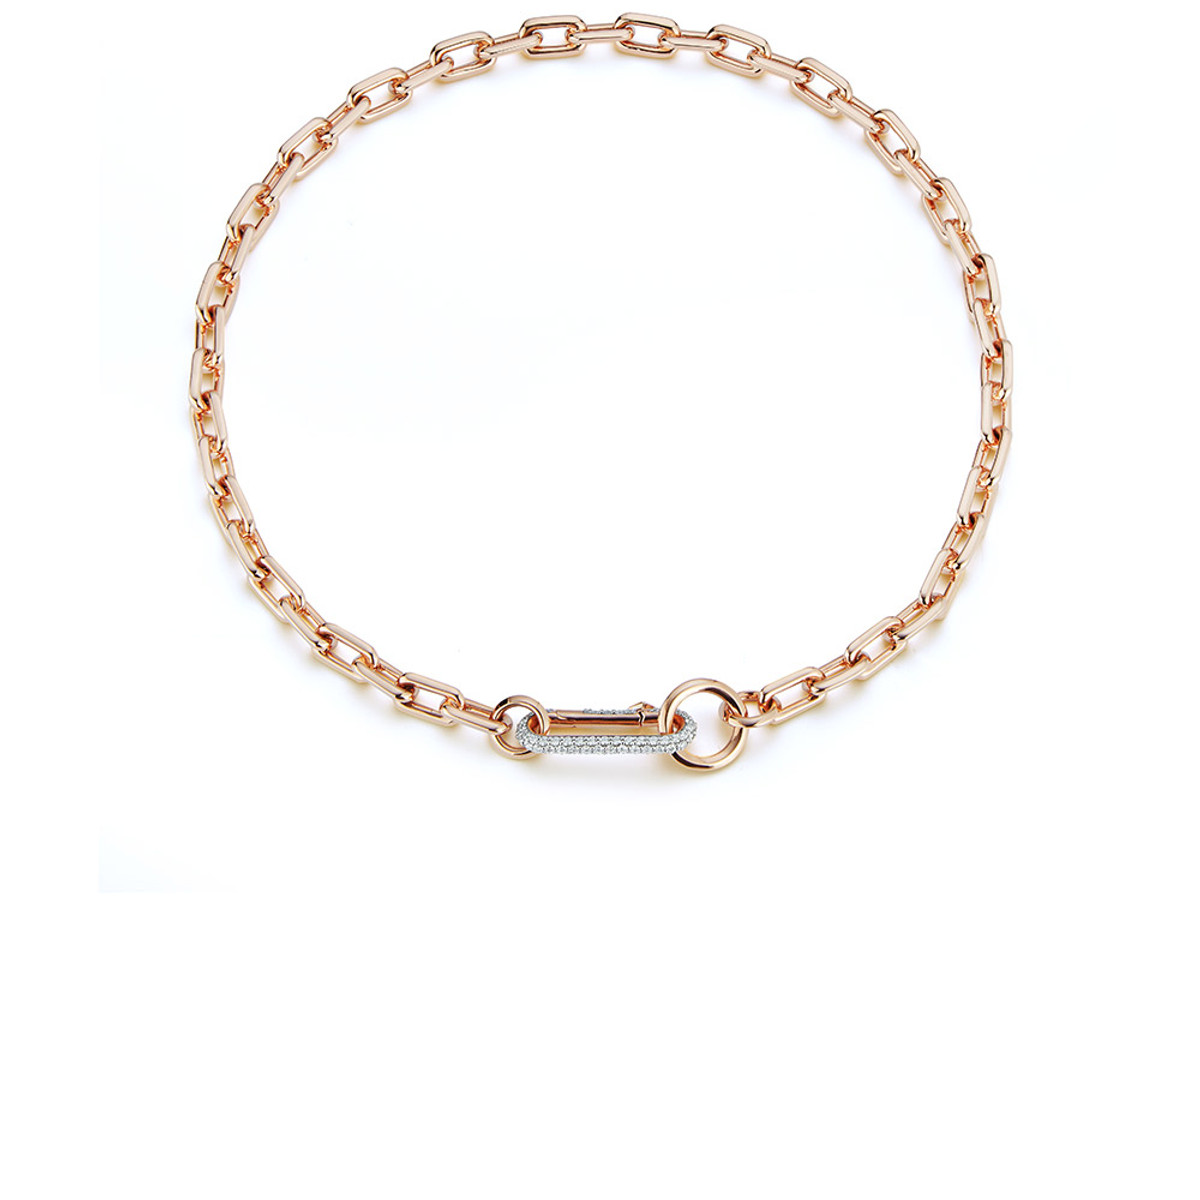 Walters Faith Saxon 18K Rose Gold Chain Link Necklace-62272